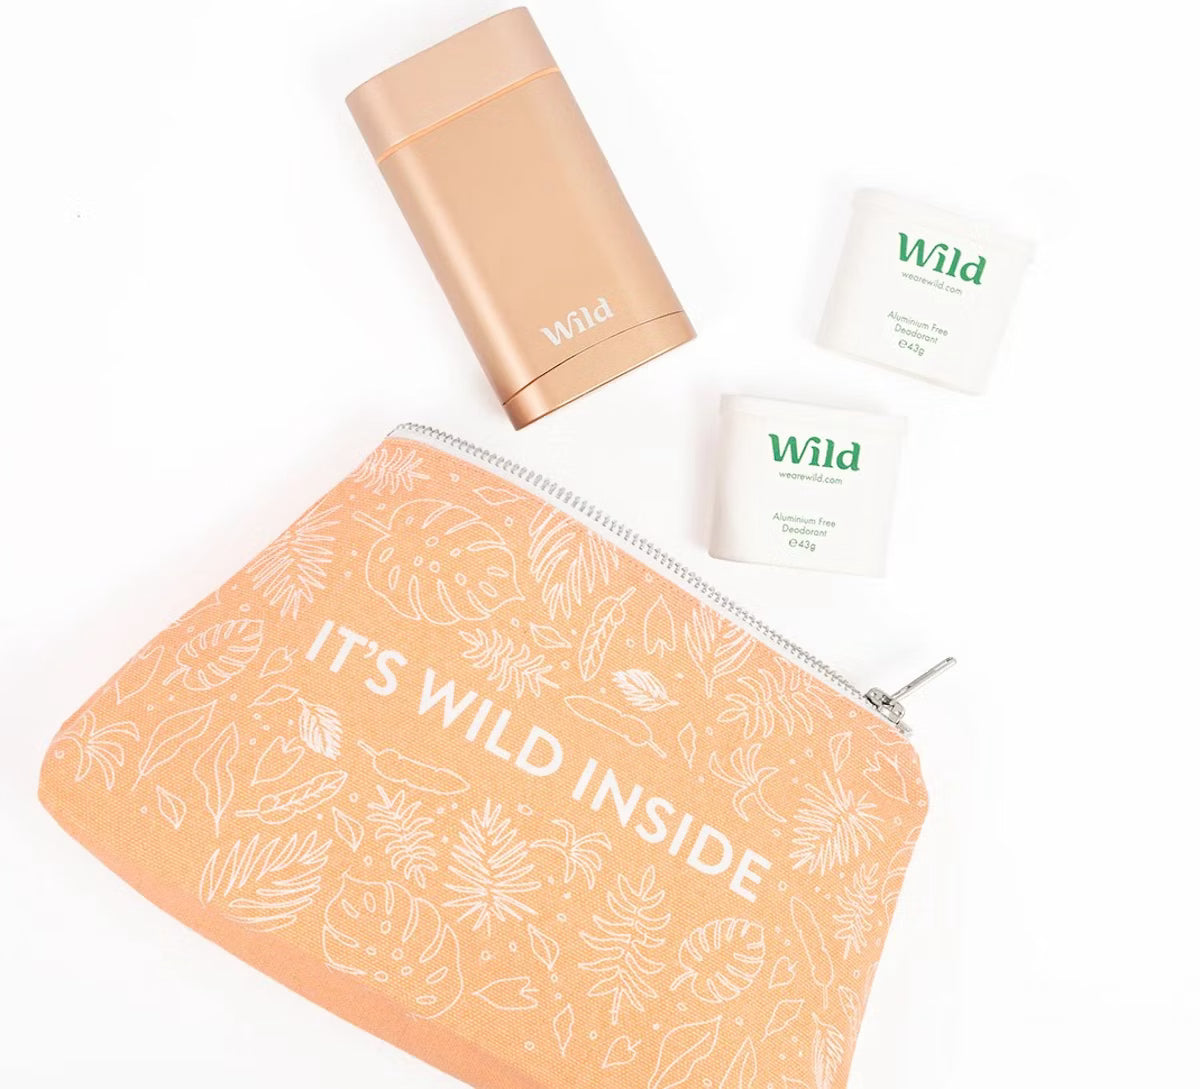 Reusable packaging example from brand Wild